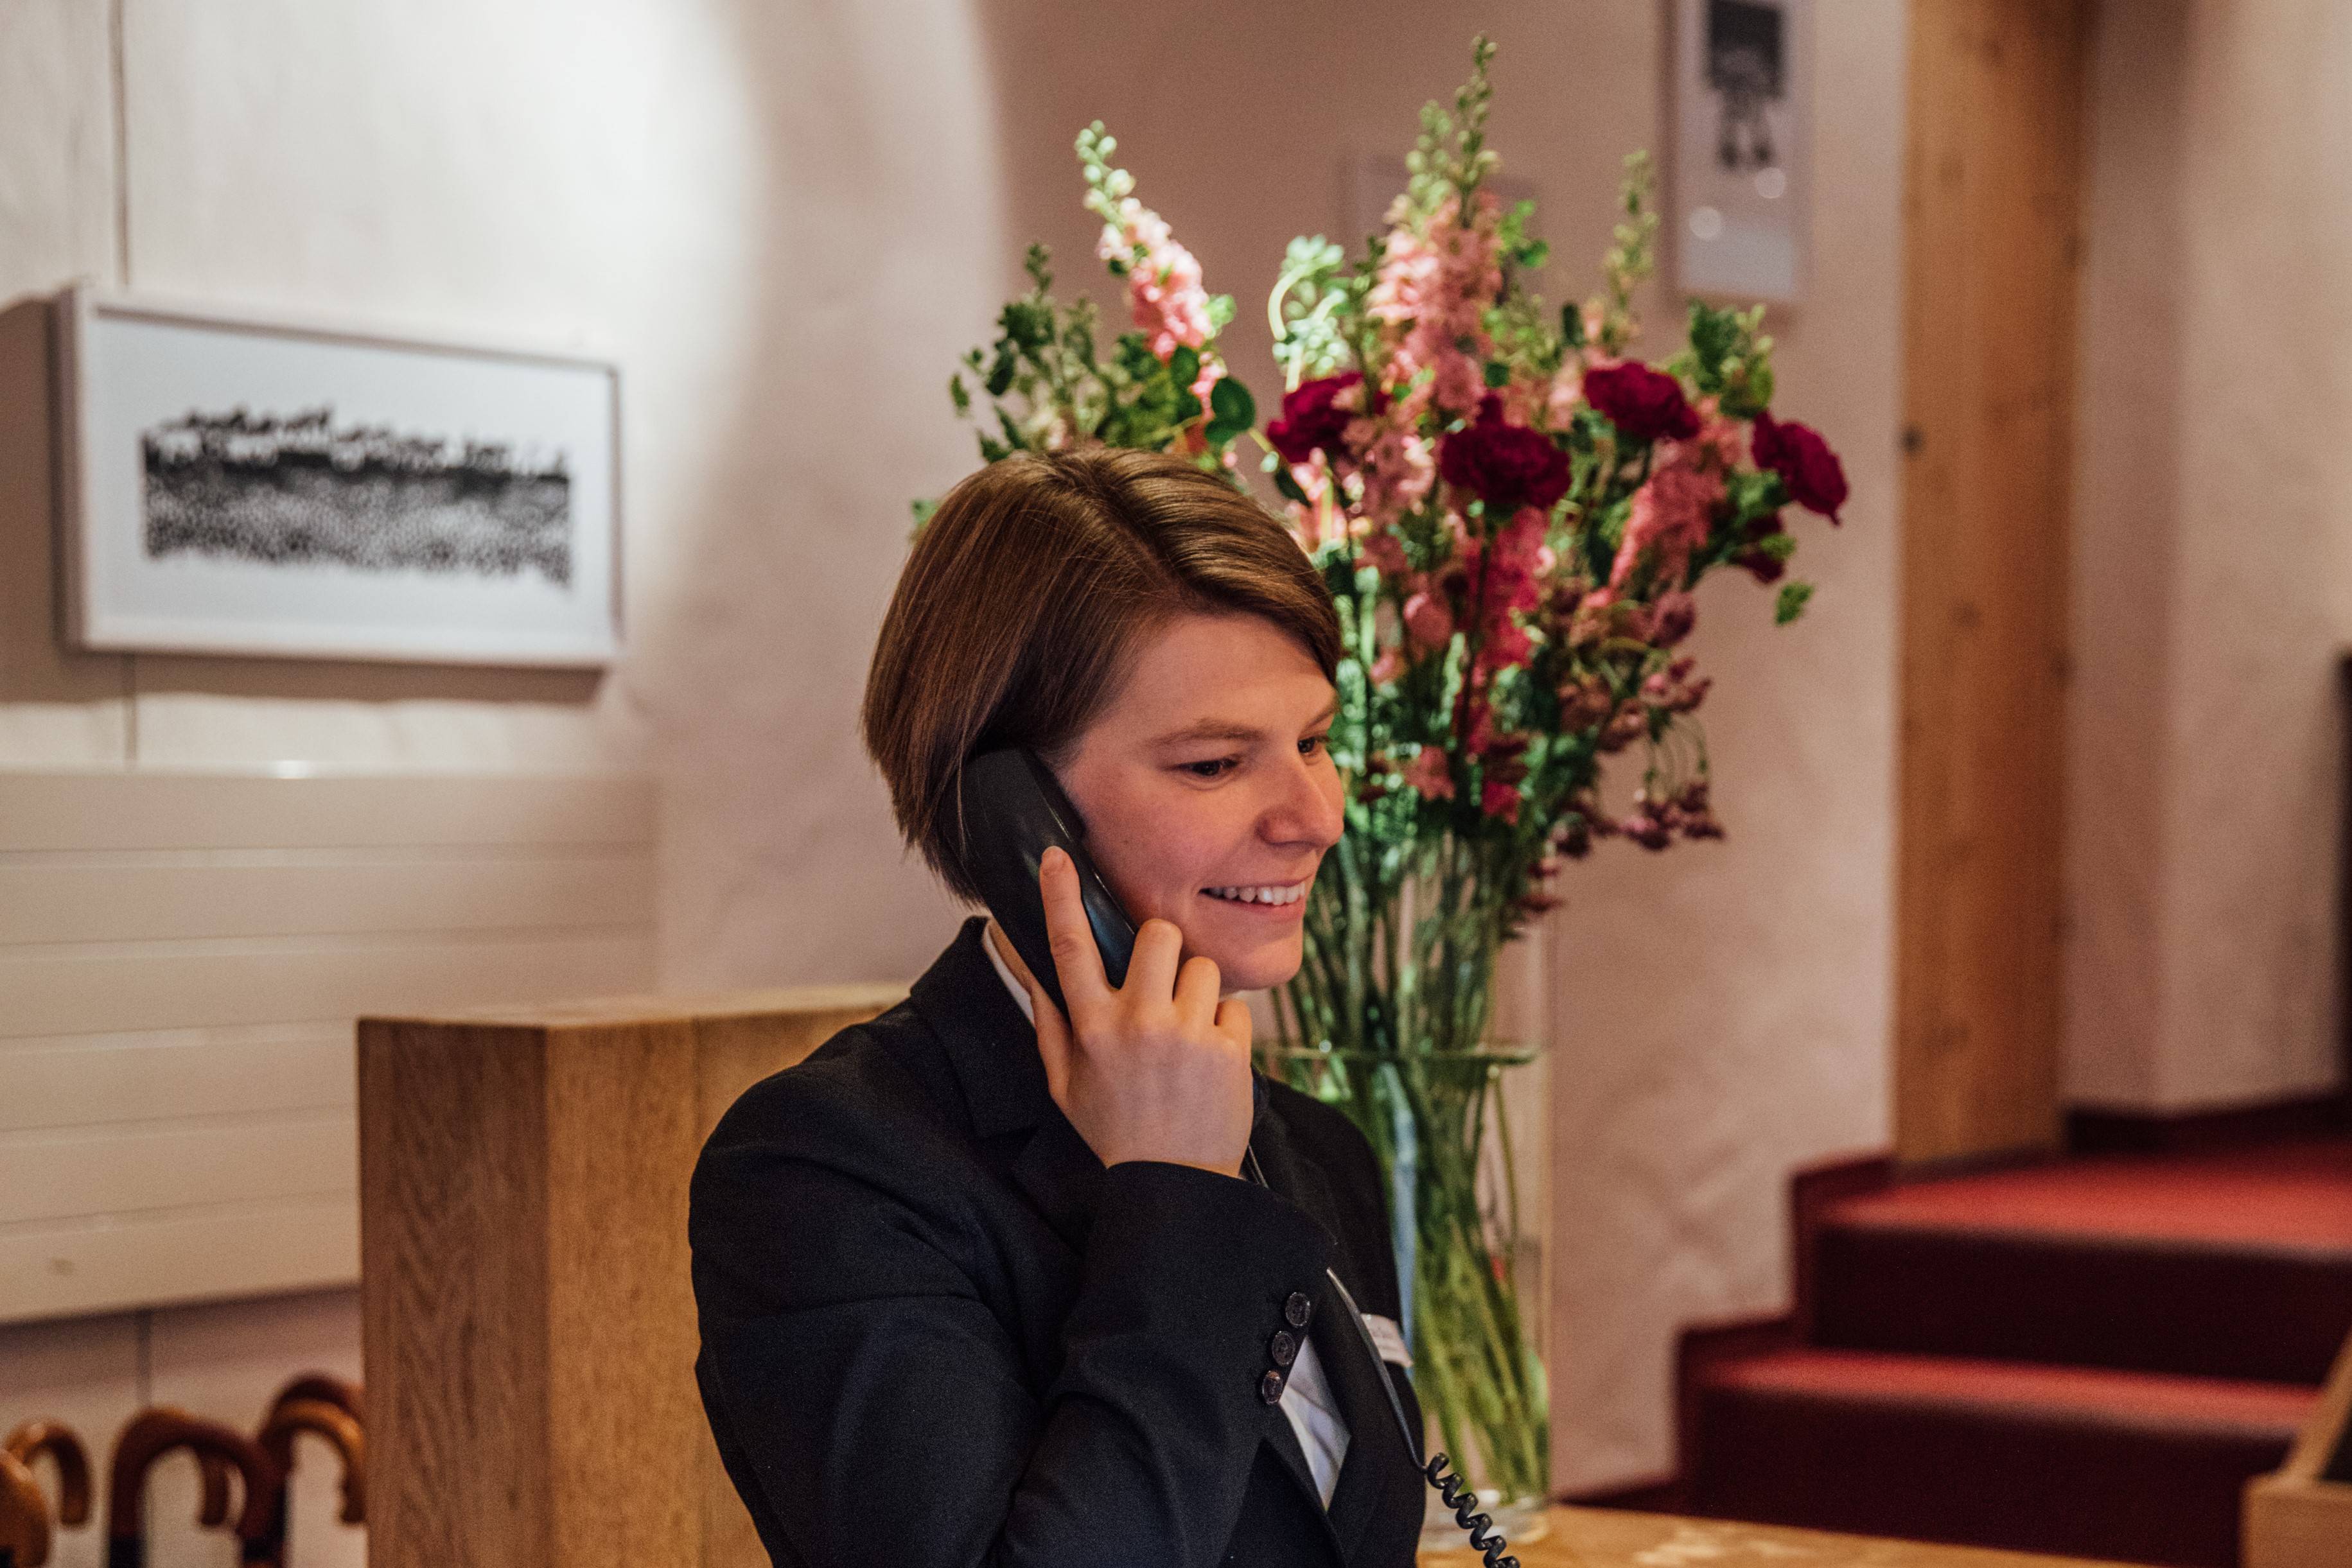 Tips and support from Hotel Gstaaderhof: Our service for you - Hotel Gstaaderhof